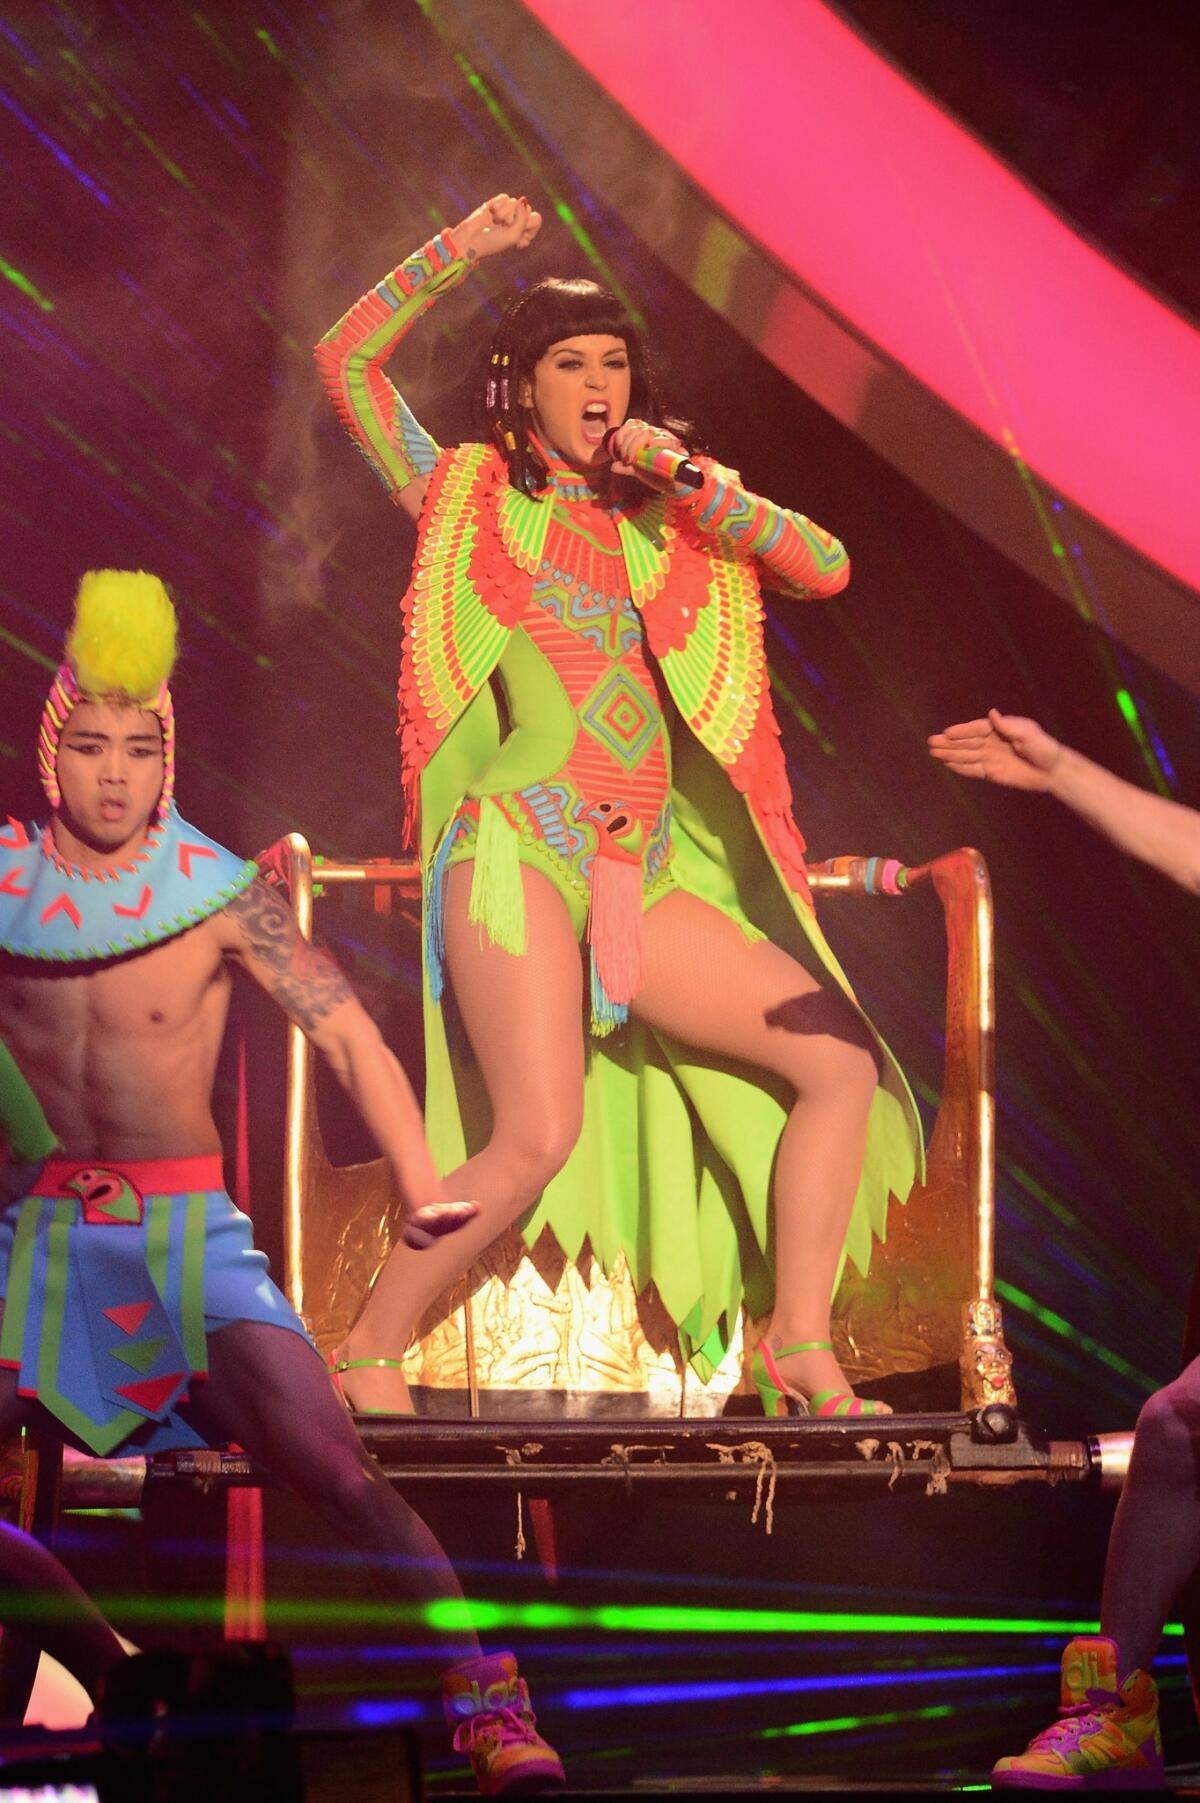 Singer Katy Perry performs at the Brit Awards 2014 in London wearing an Egyptian-inspired body suit by Nicolas Jebran.